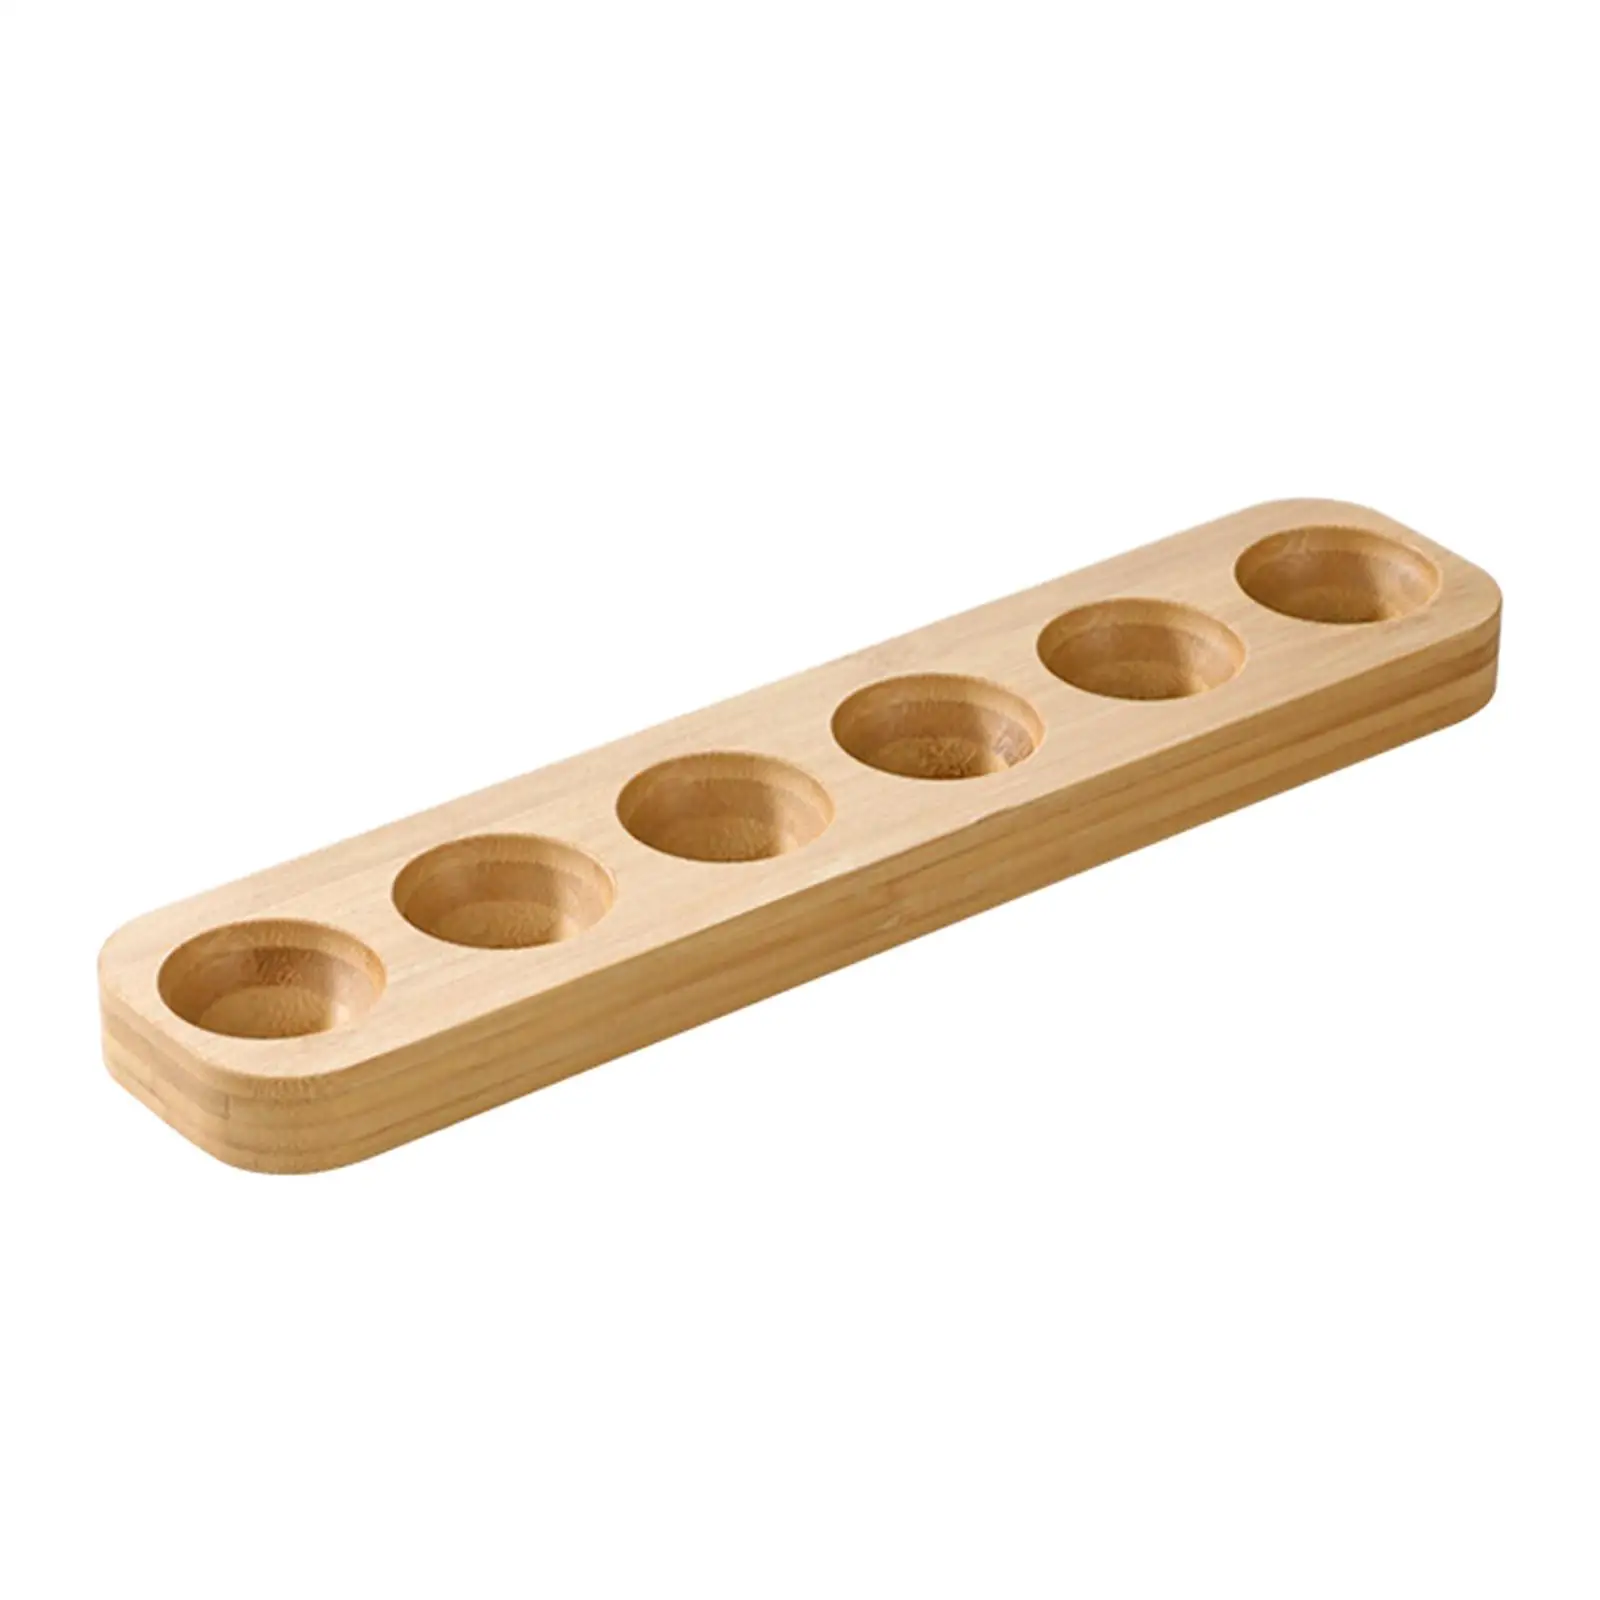 Wooden Egg Holder Counter Unique Gift Egg Container Rack Wood Egg Tray for Pantry Supermarket Cabinet Kitchens Accessories